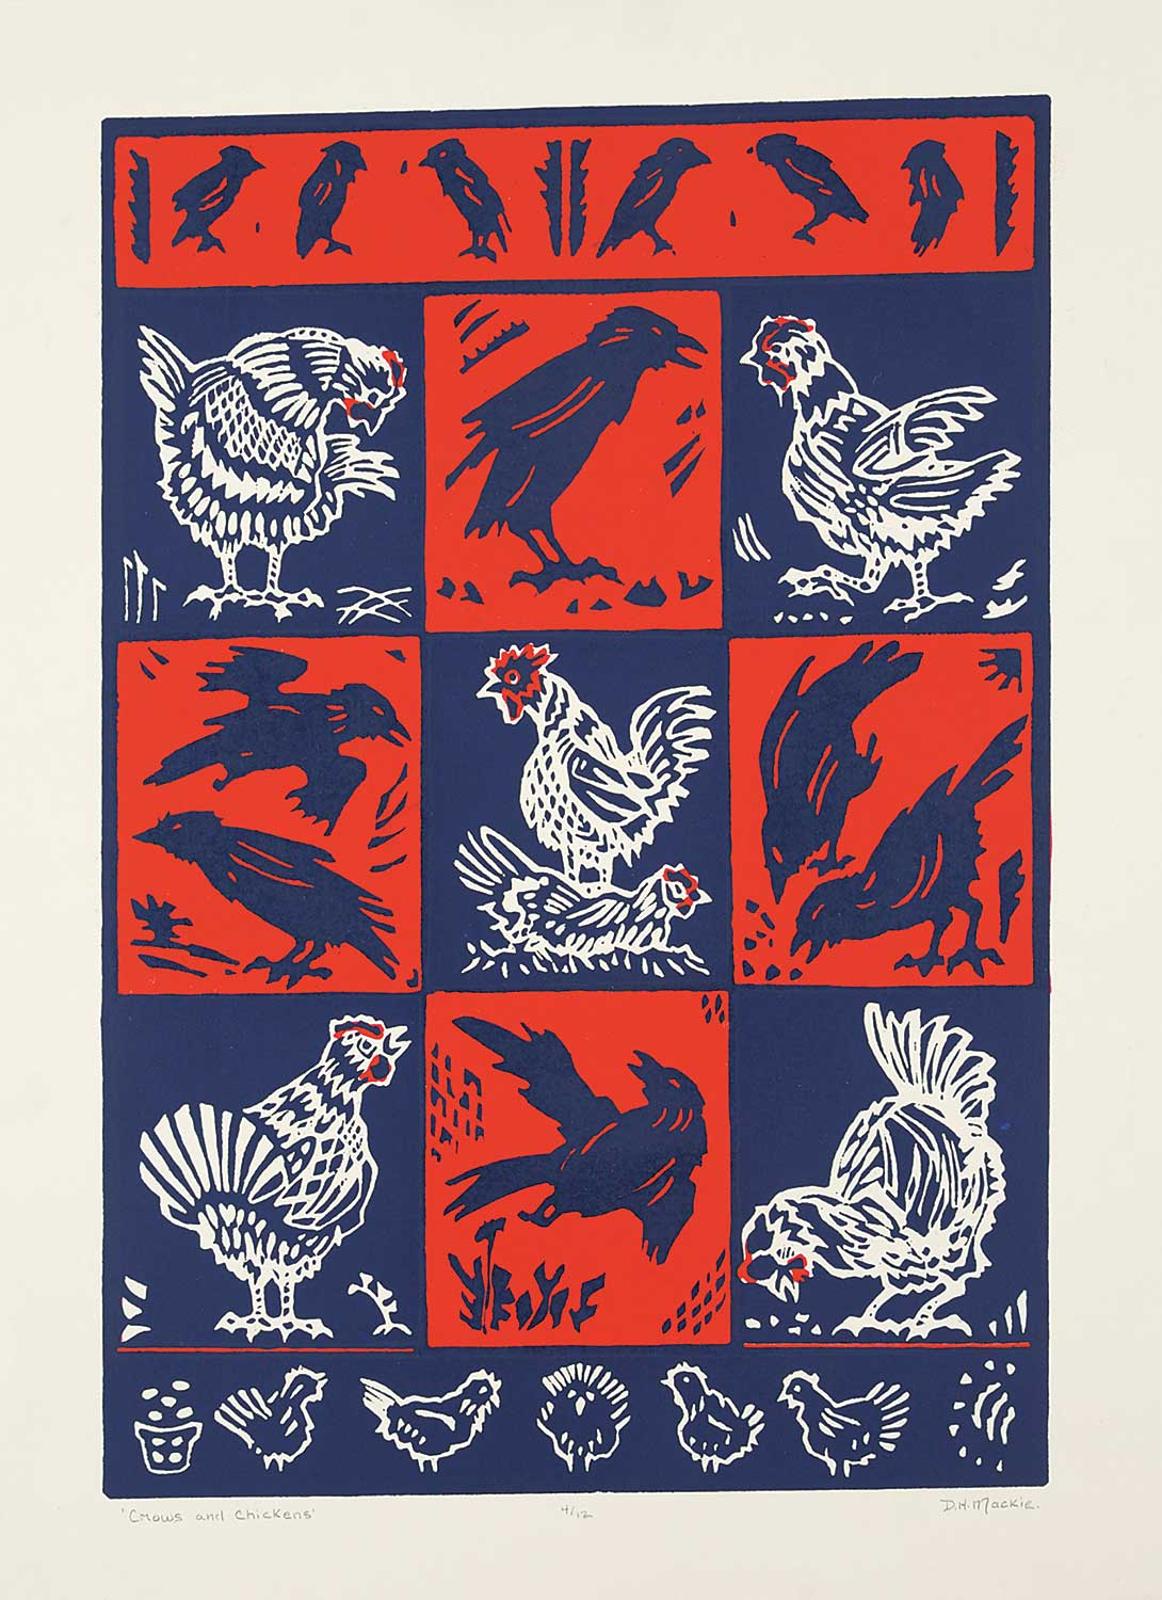 Dora Helen Mackie (1926) - Crows and Chickens  #4/12